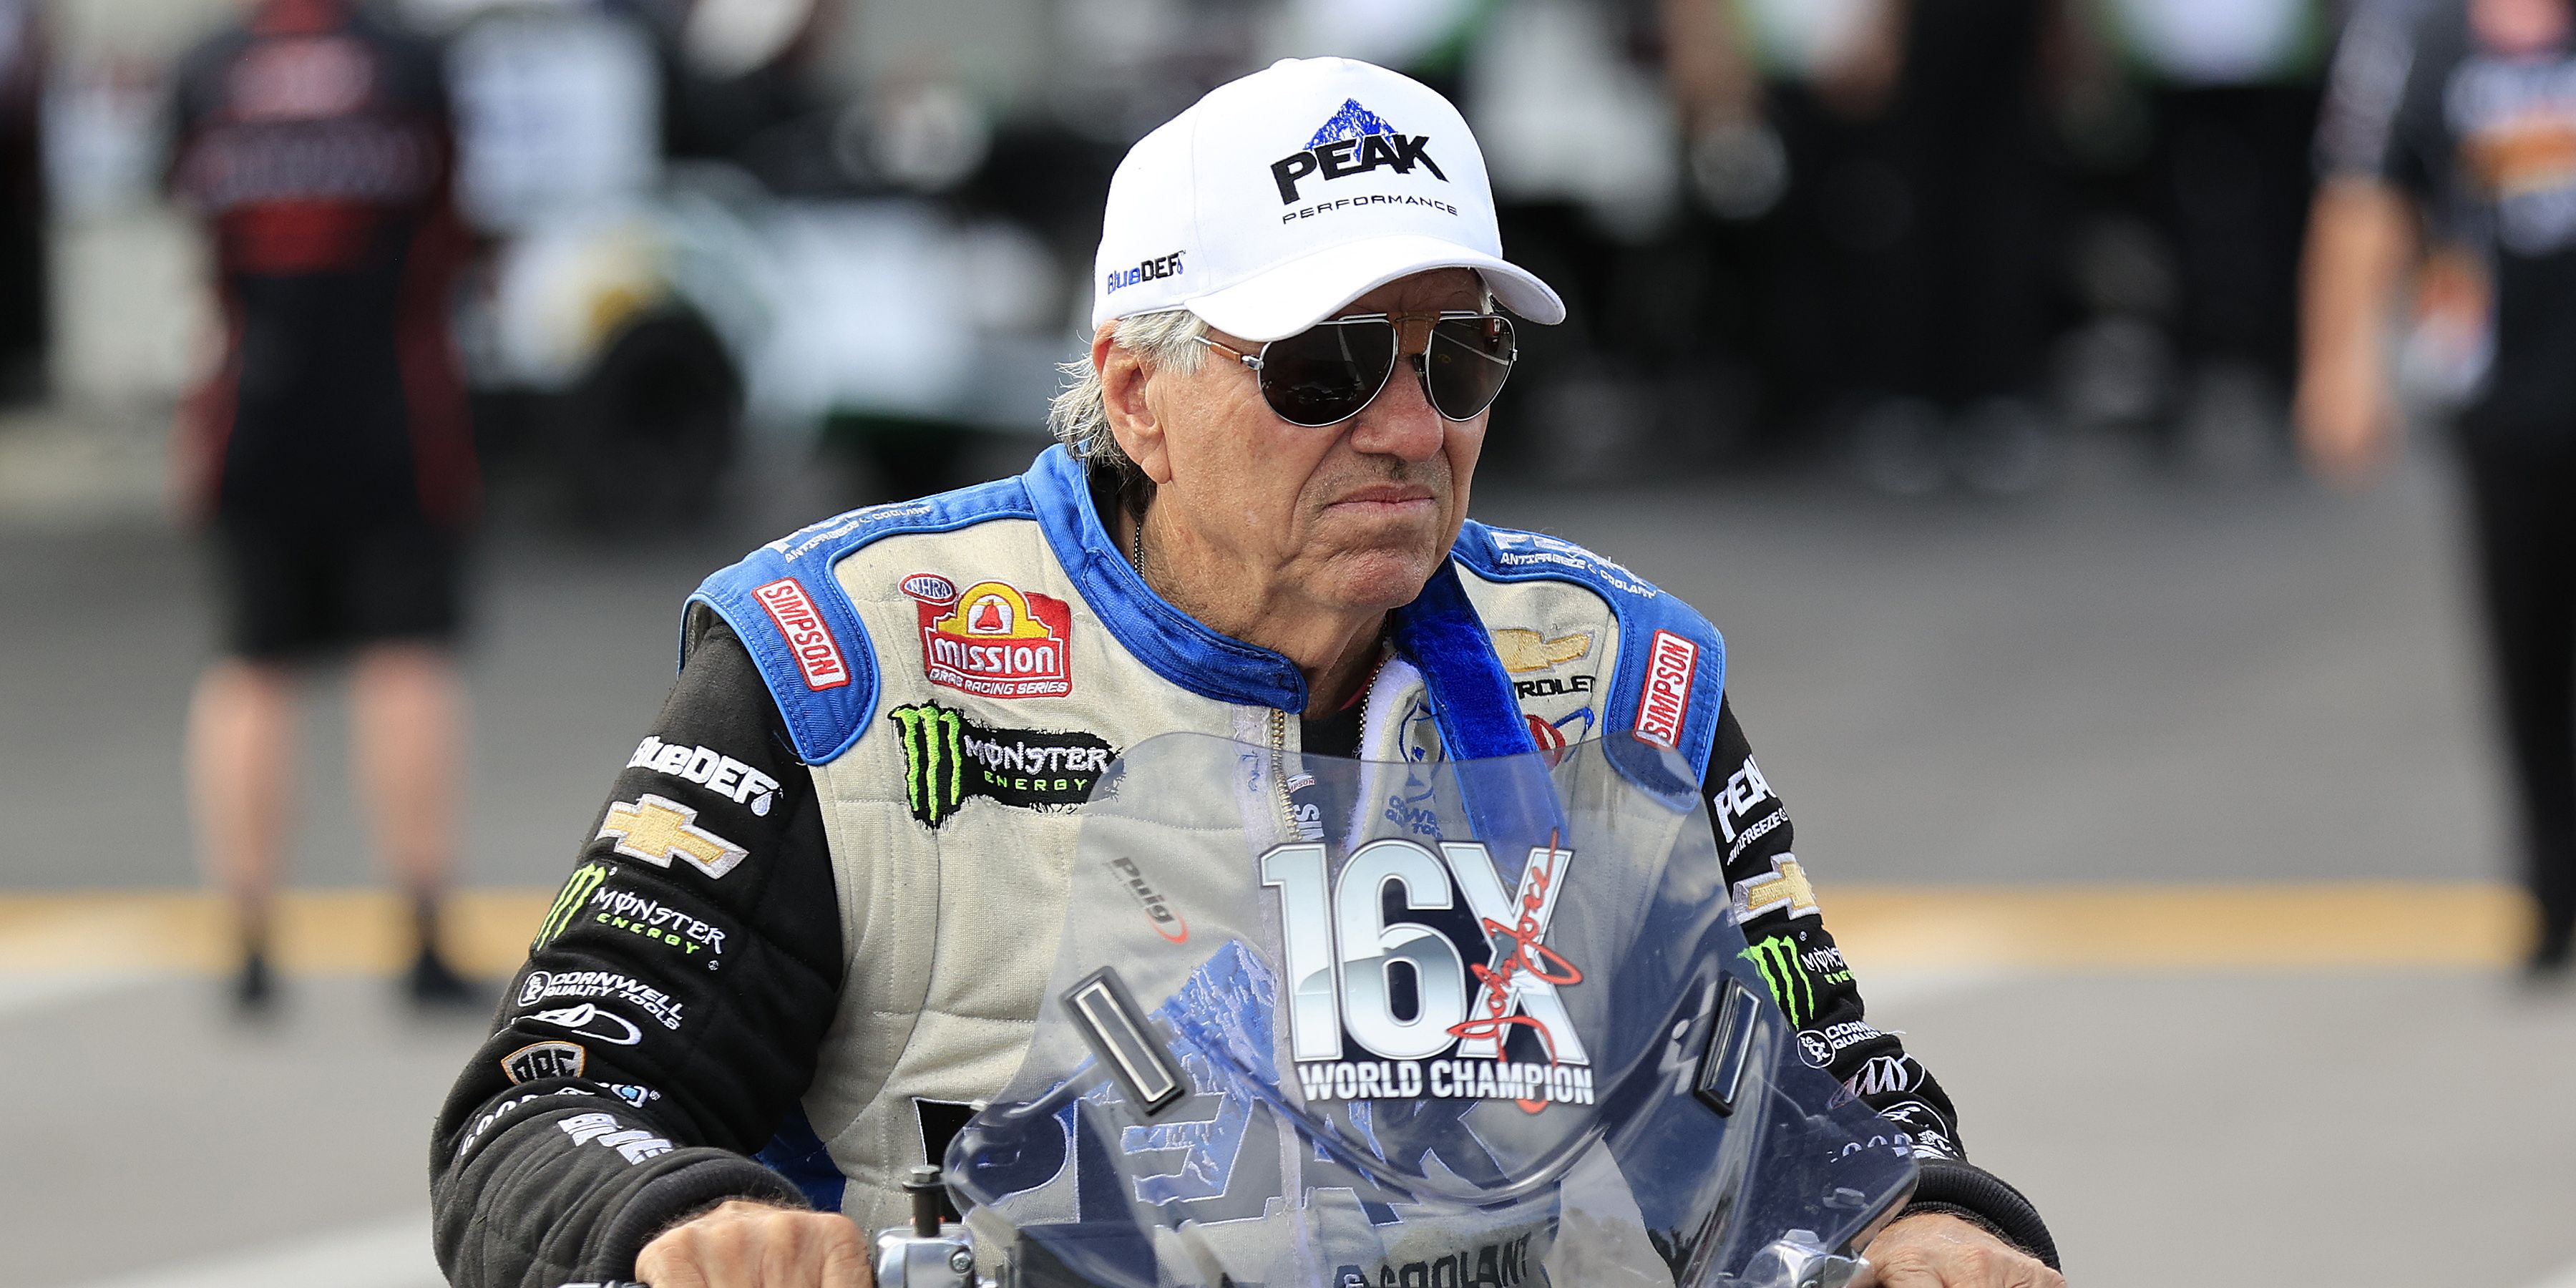 John Force is Improving, Able to Communicate with Family While Still on a 'Long Road Ahead'